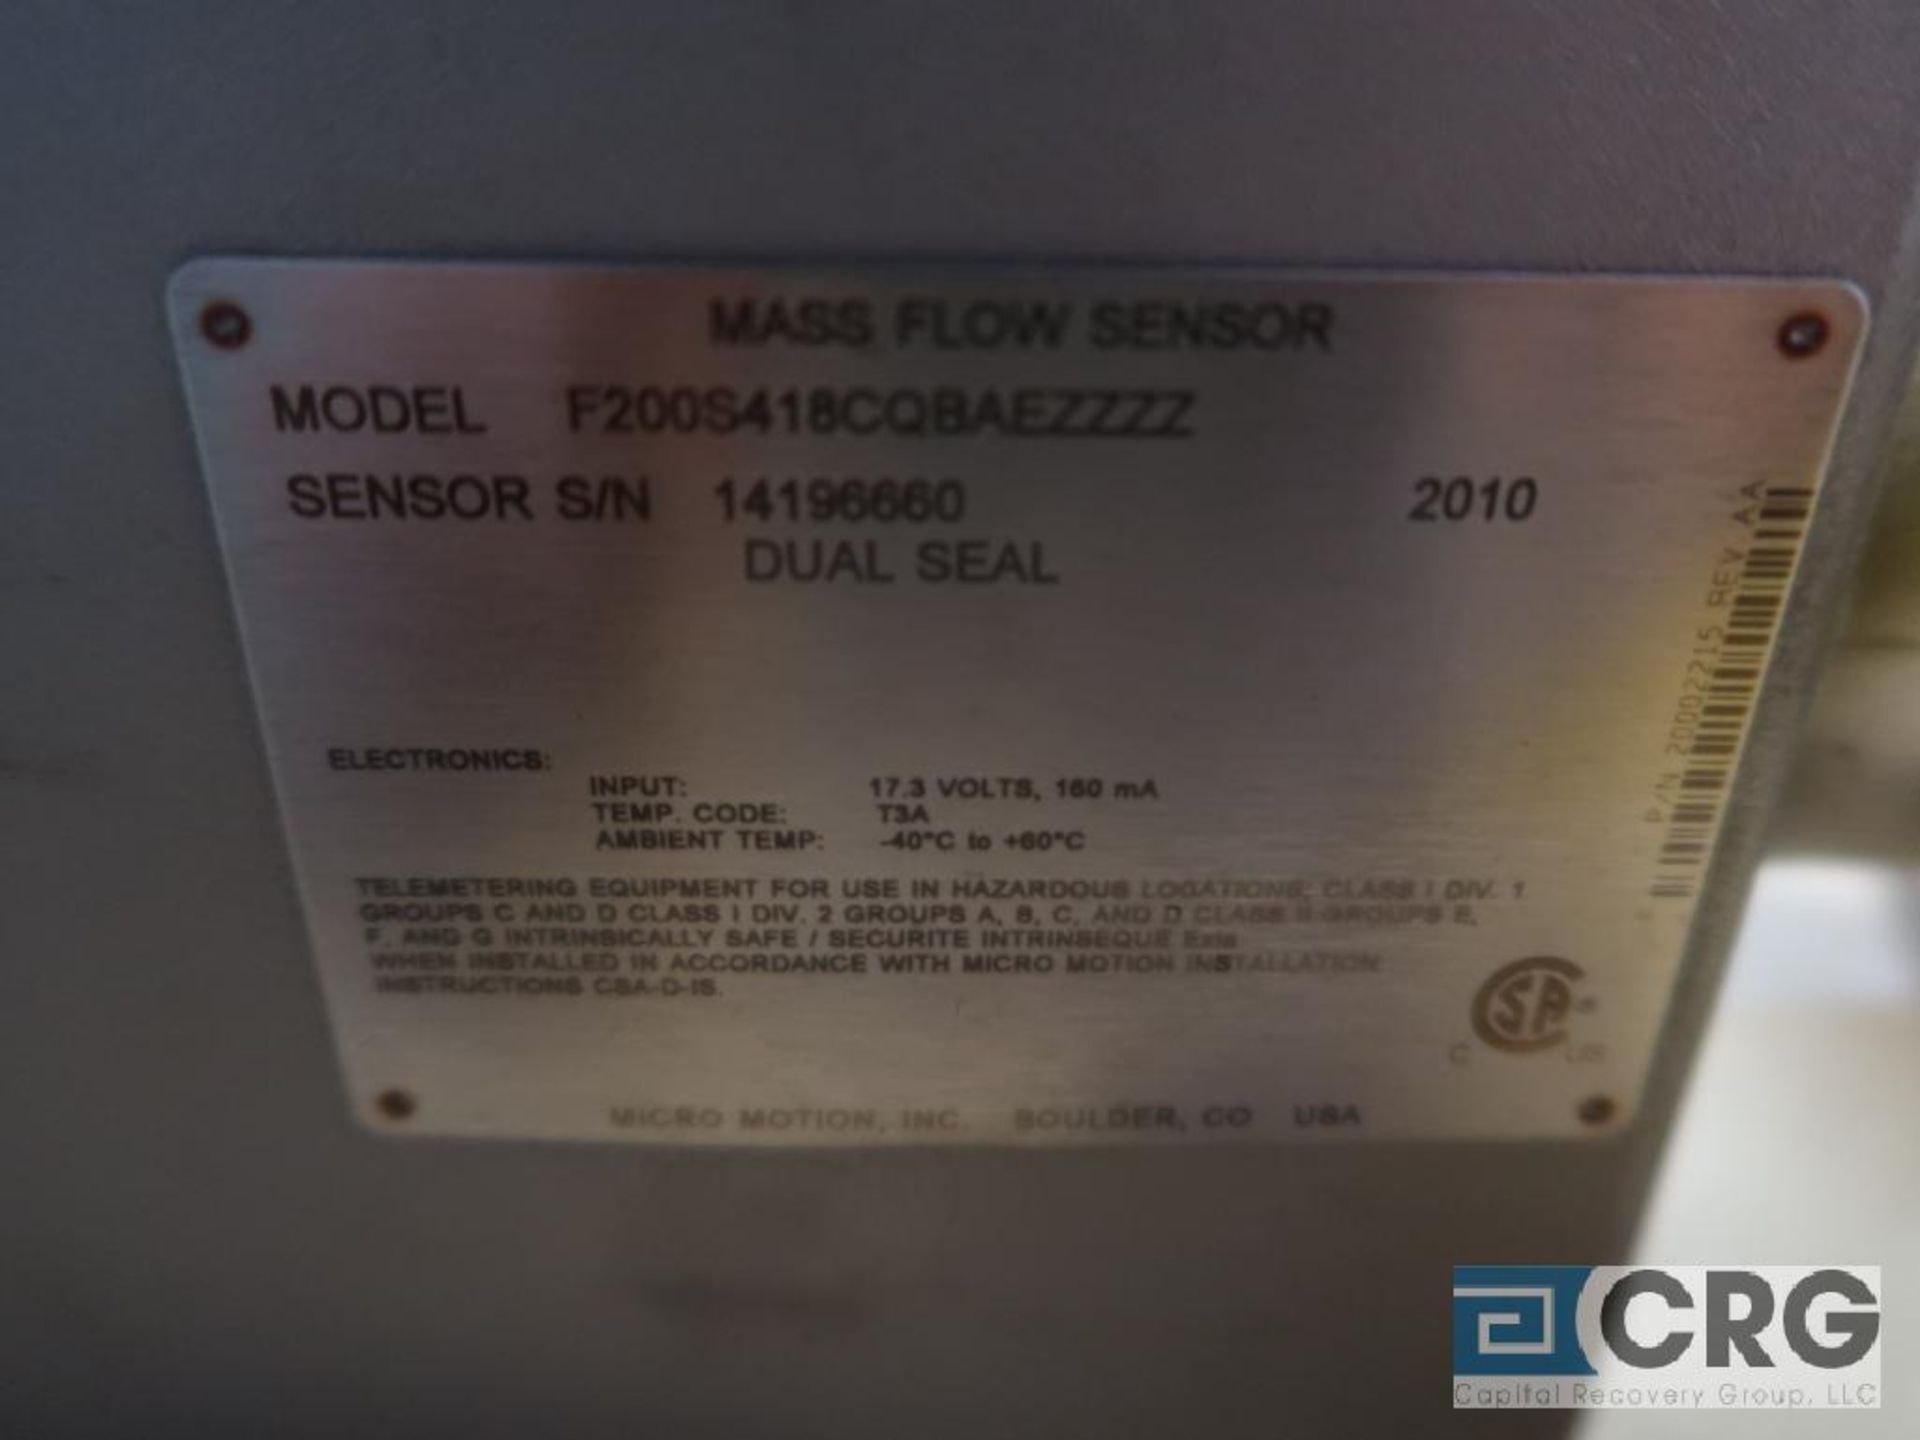 Micro Motion F200S418CQBAEZZZZ stainless 2 in. mass flow sensor, flow cal. 1556.34.56, s/n - Image 2 of 2